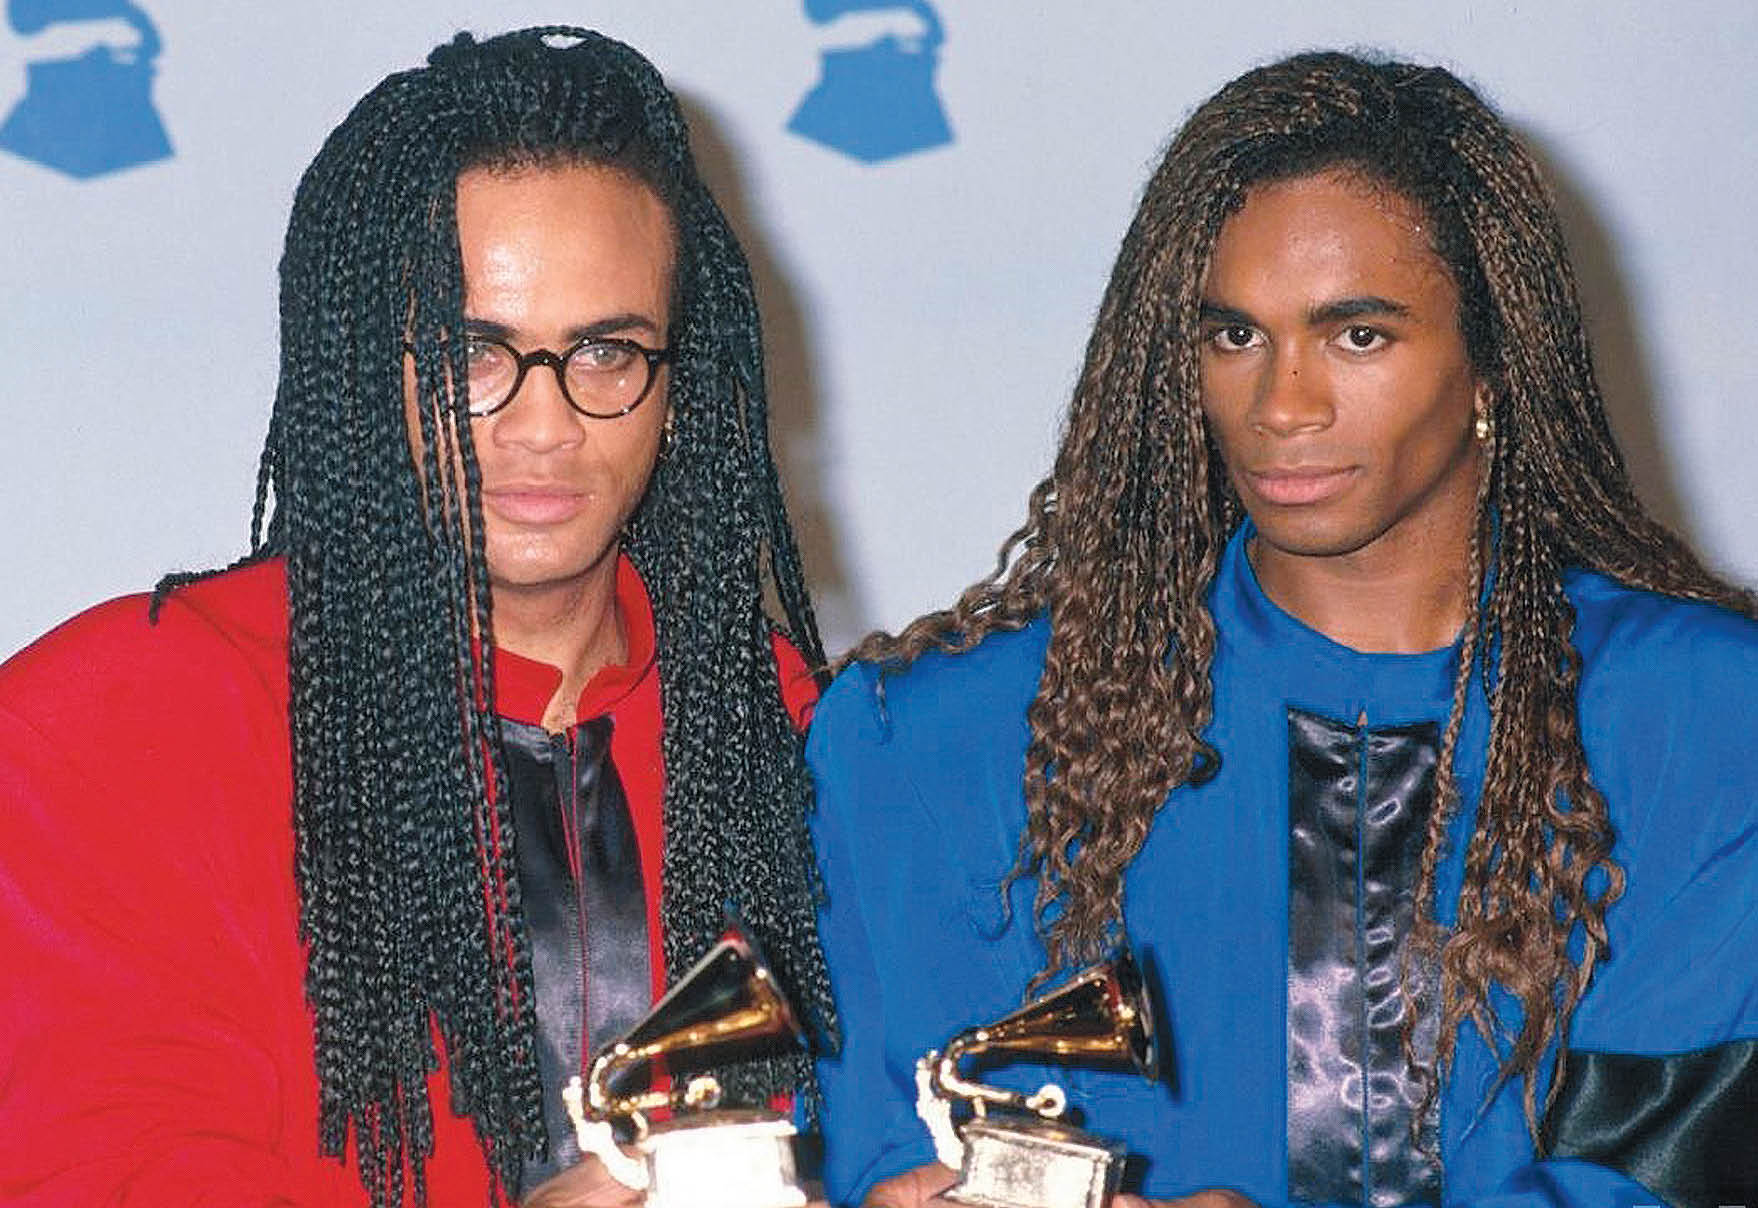 Rob Pilatus and Fab Morvan, also known as Milli Vanilli, accepting a Grammy in 1990. Photo courtesy NARAS